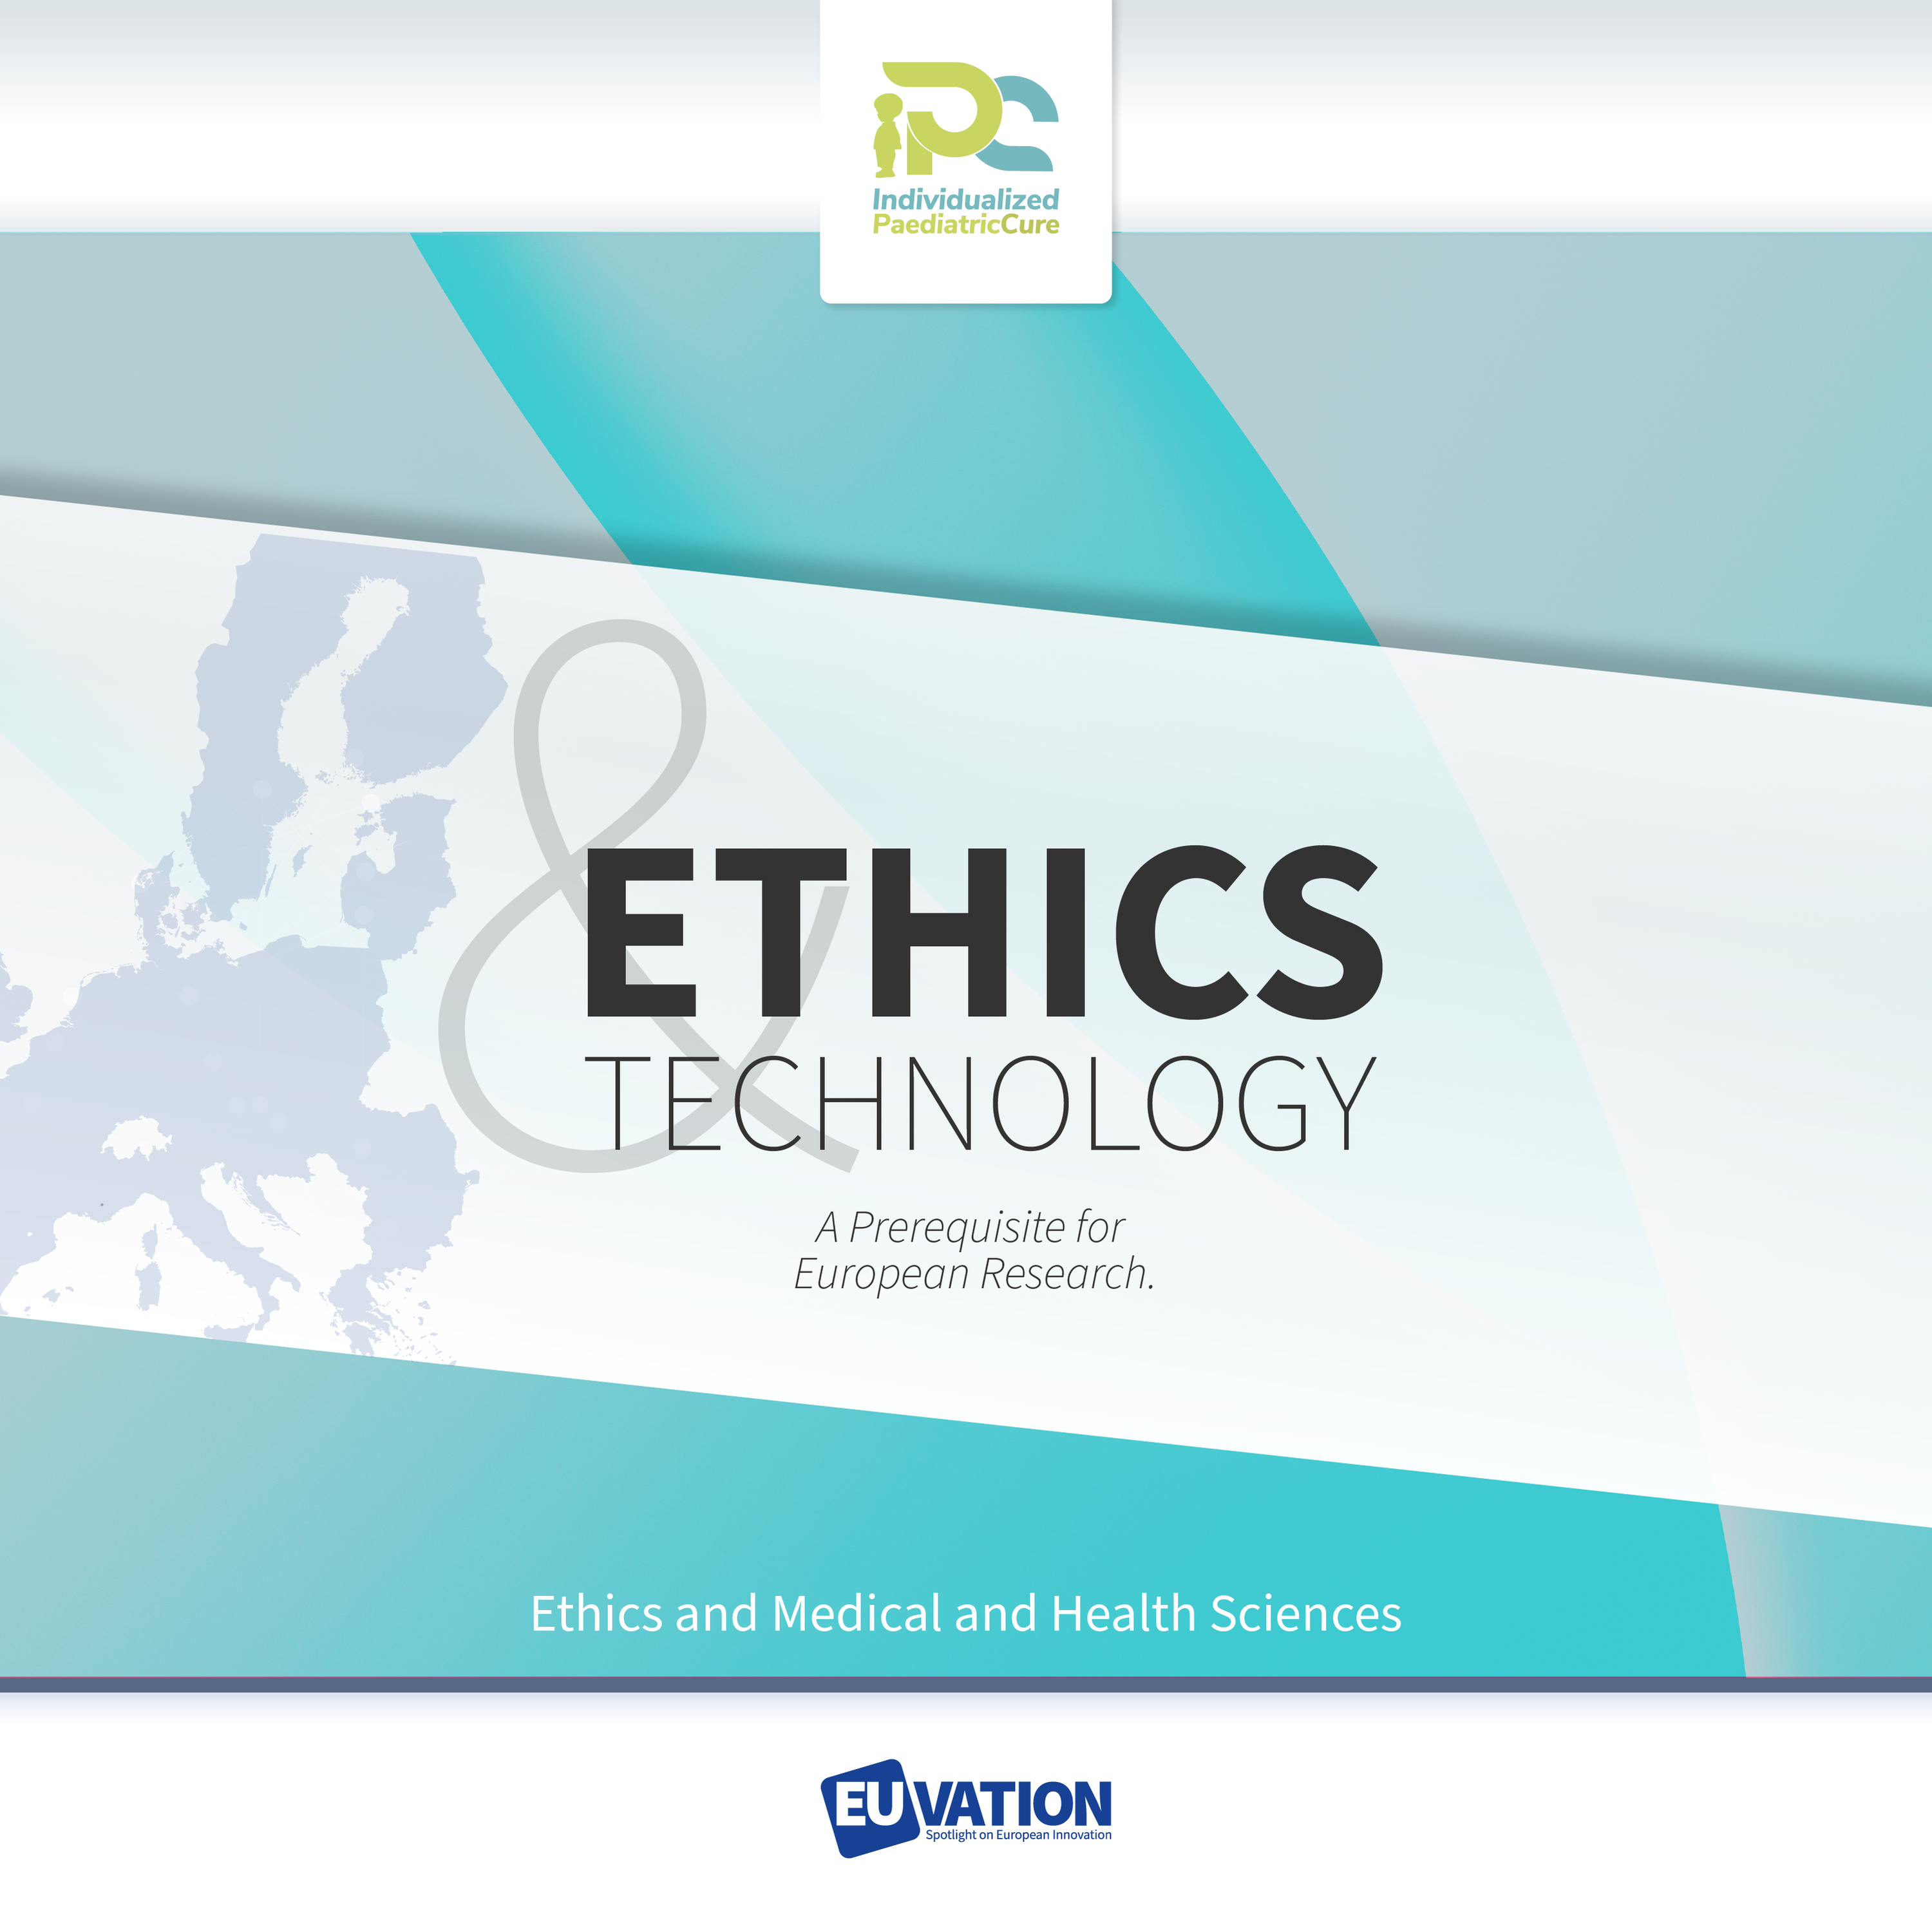 Ethics and Technology (1) – a Prerequisite for European Research: Medical and Health Sciences